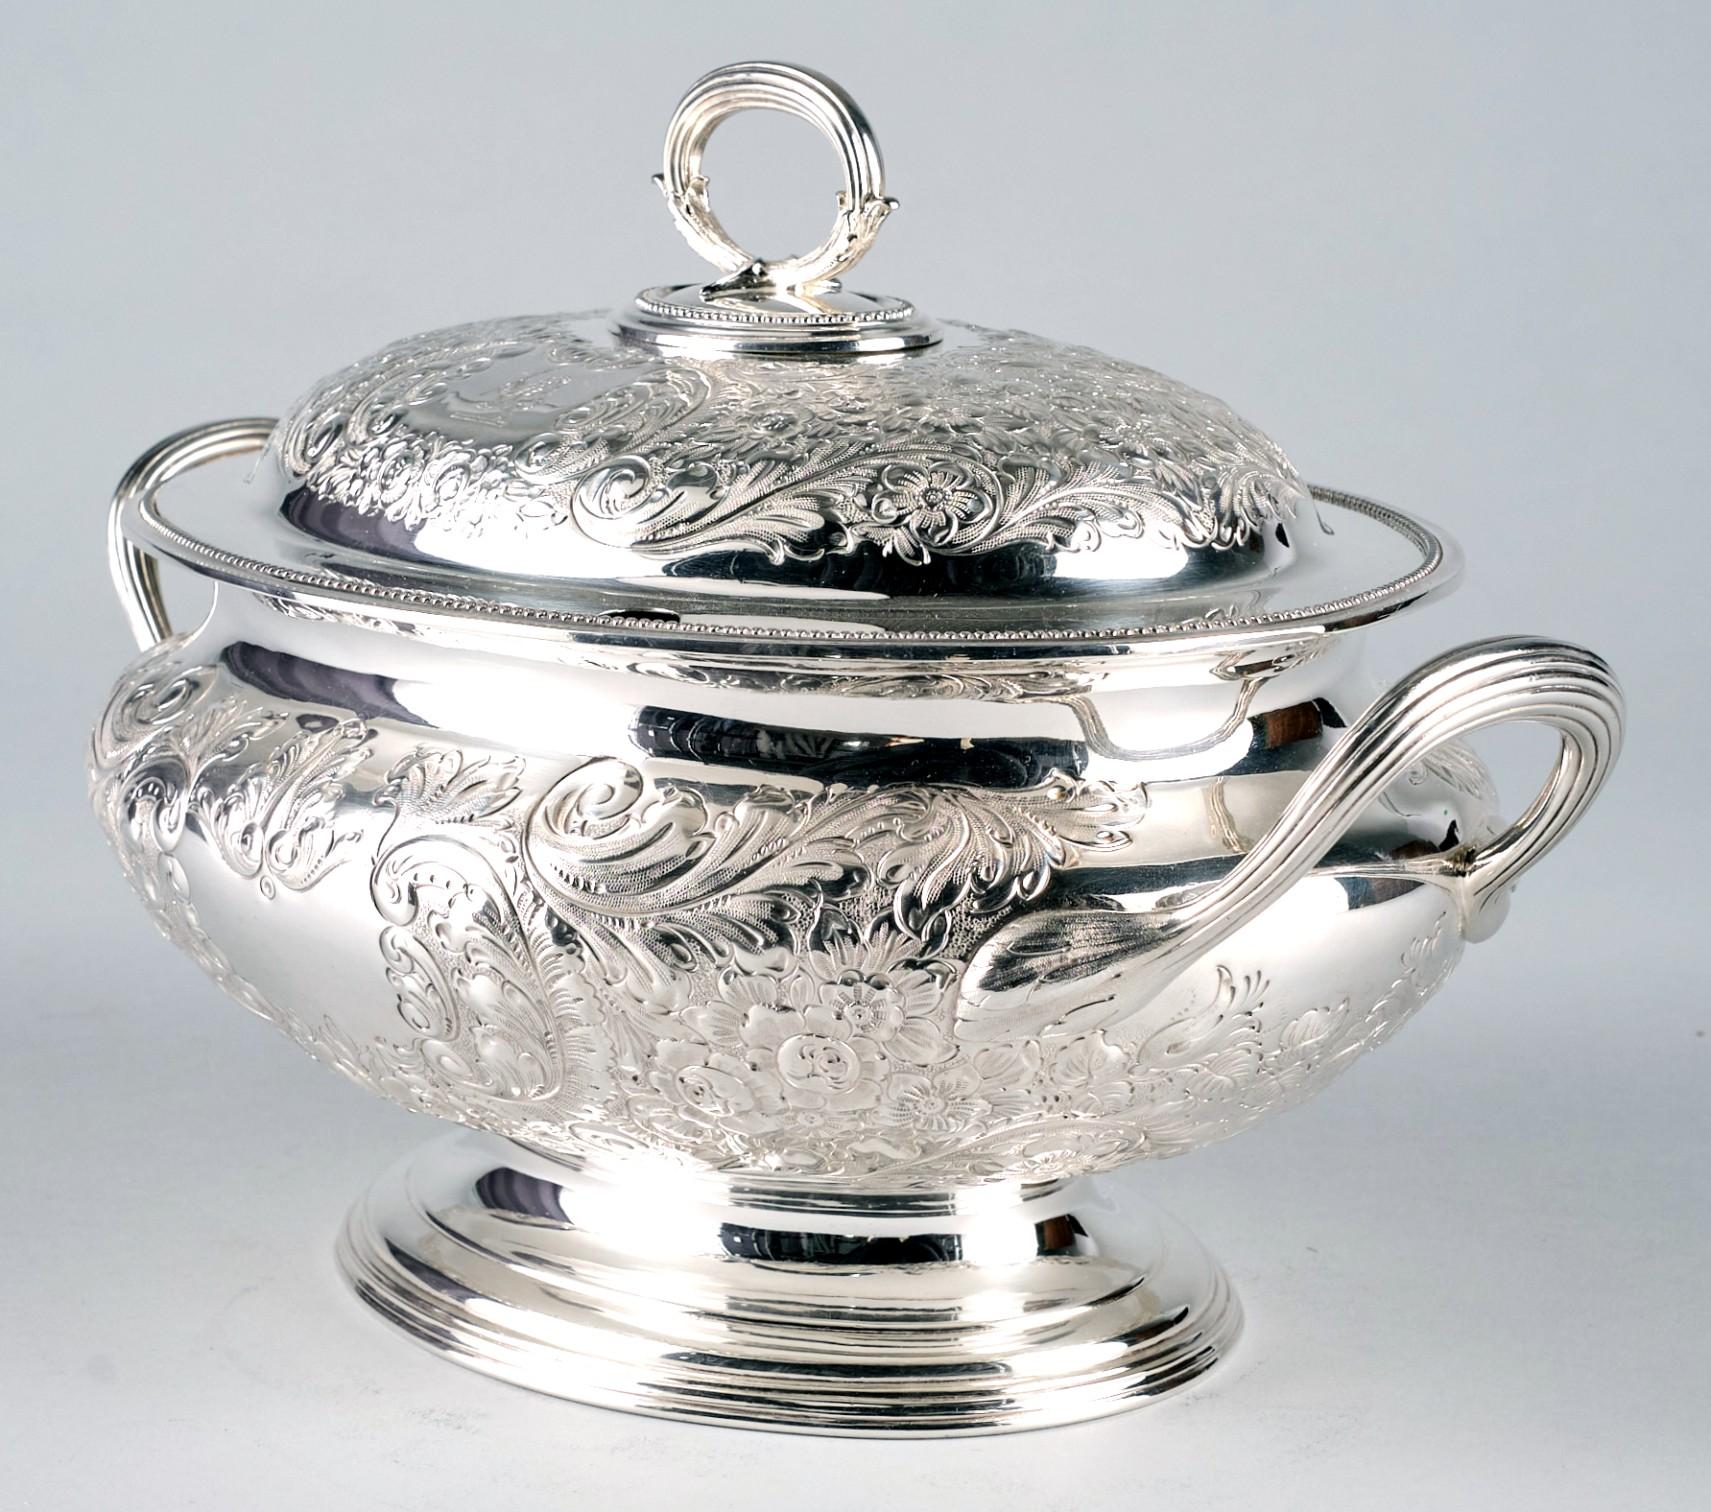 Victorian A Very Fine 19th Century Silver Plated Lidded Soup Tureen by Elkington & Company For Sale